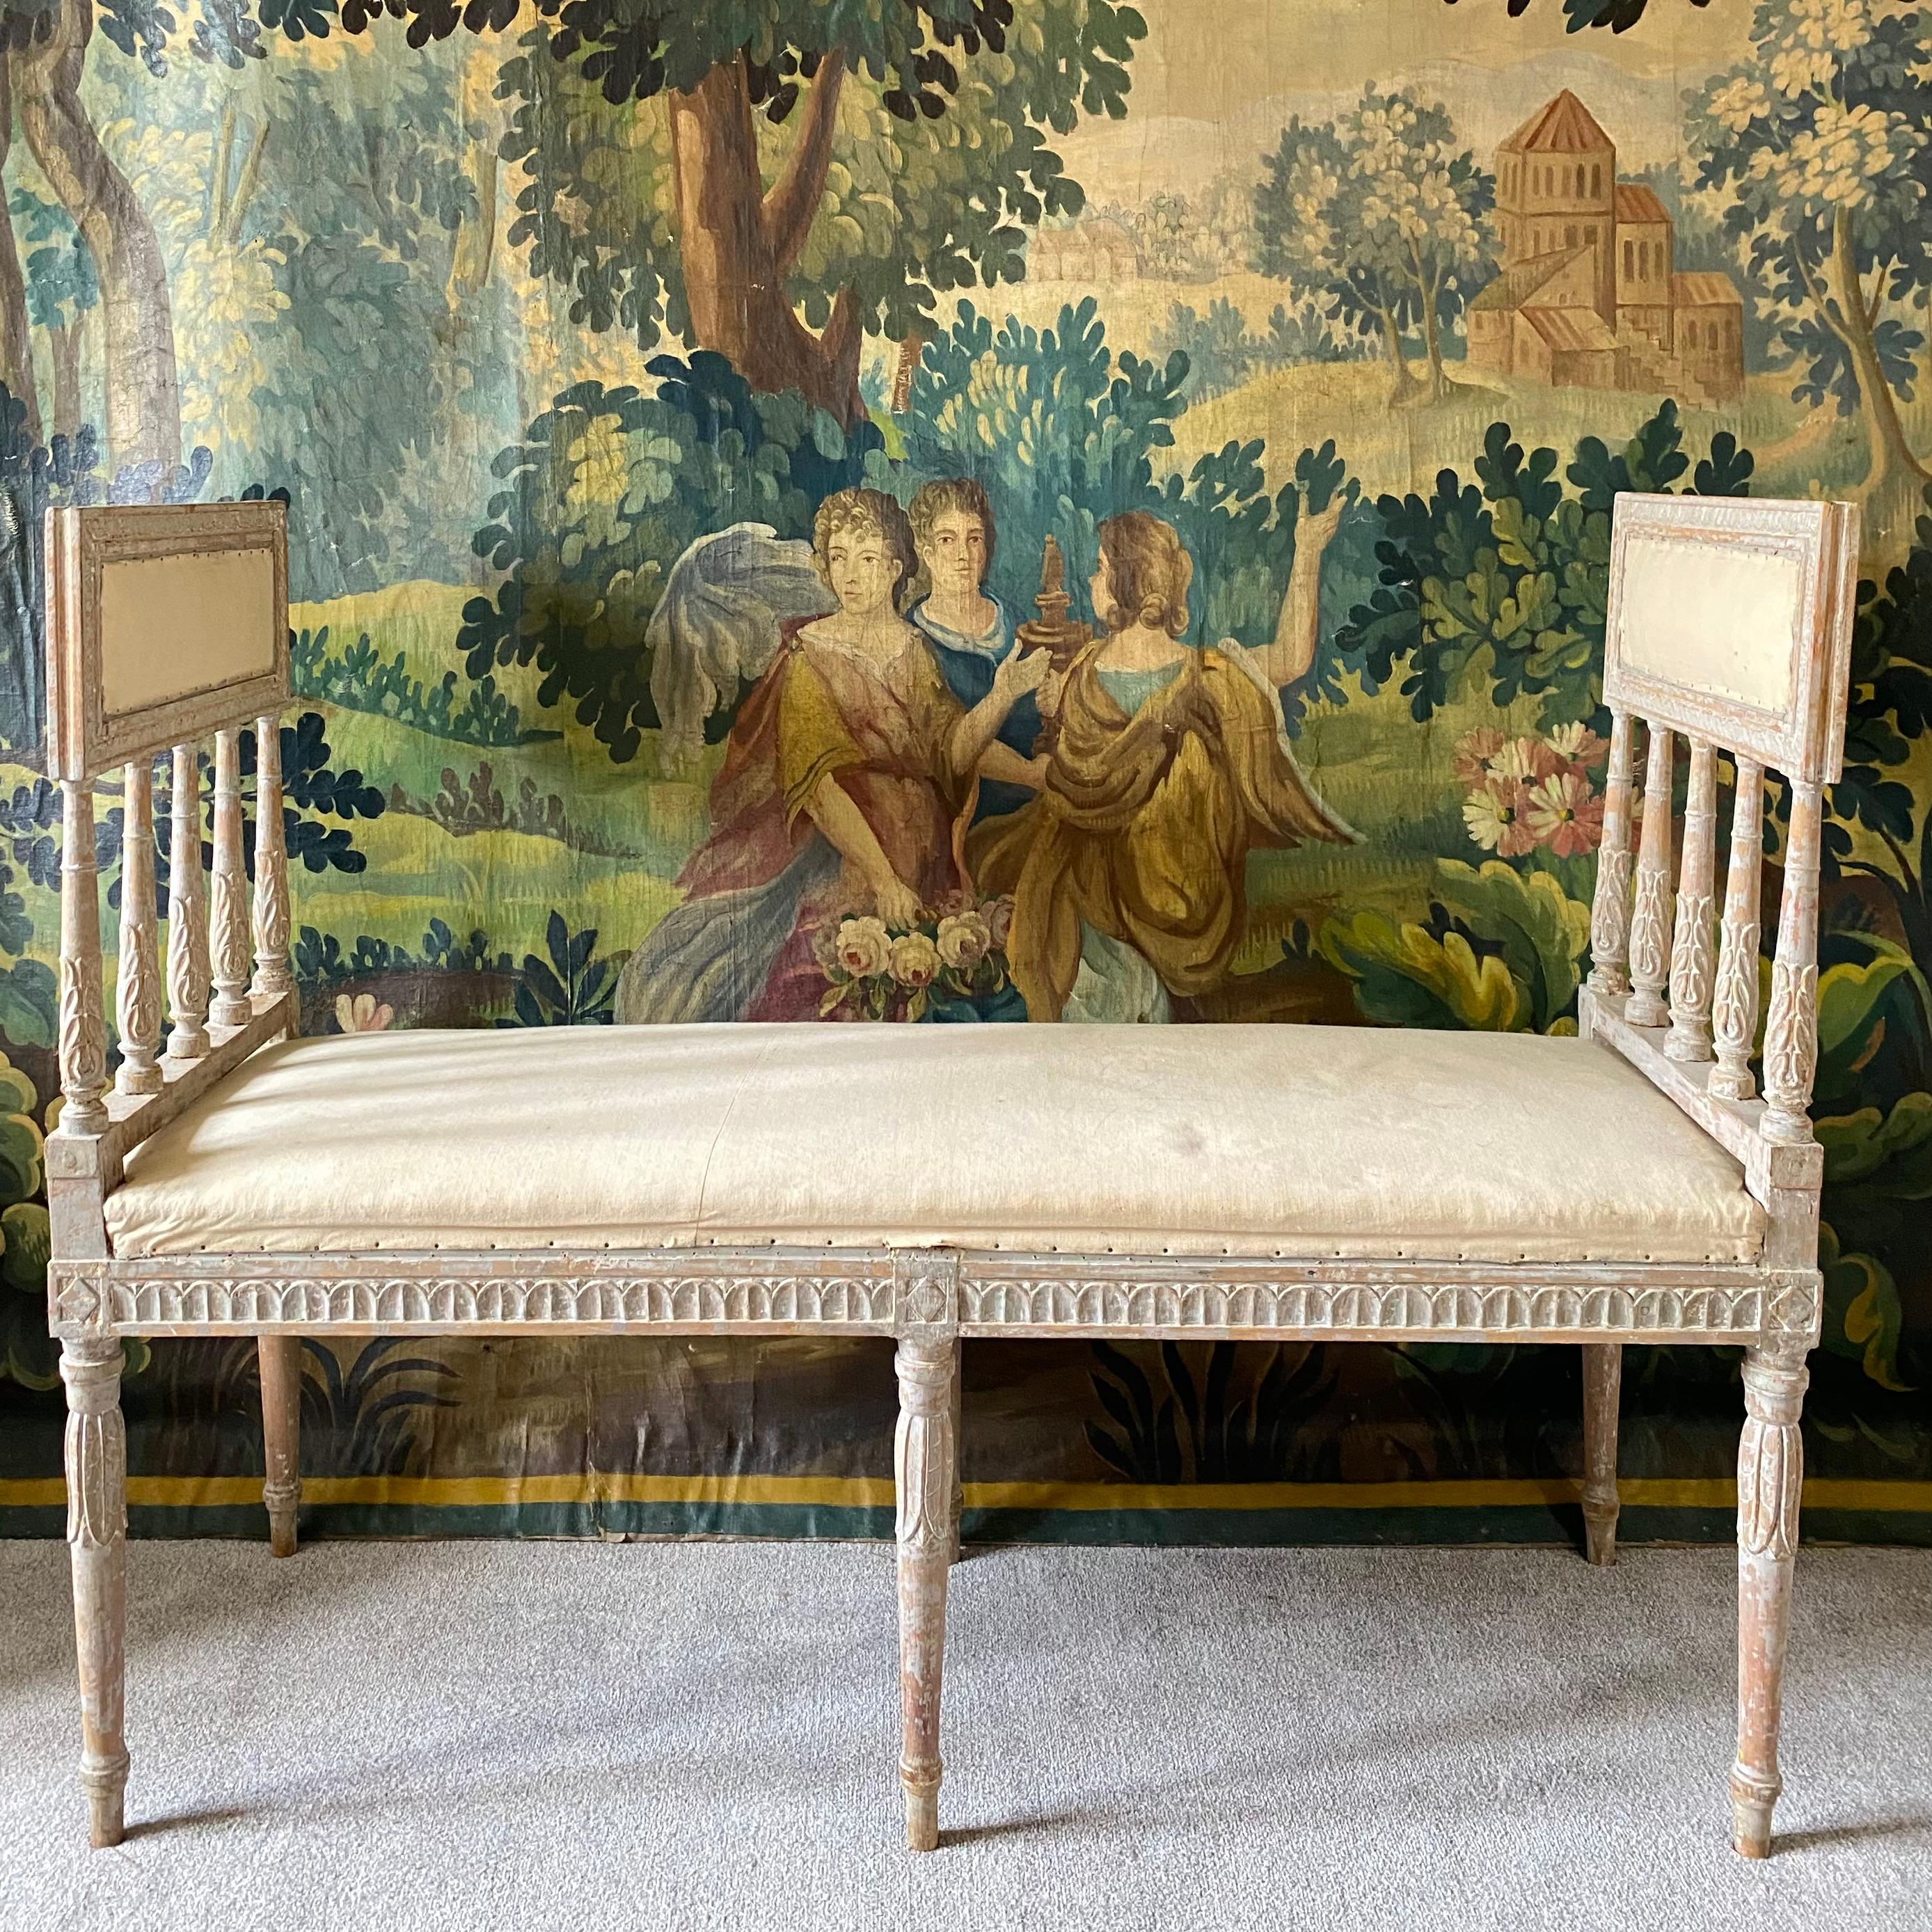 A very beautiful Swedish period gustavian window seat - window seats are differentiated by stools and benches because they are carved on all four sides - and are quite rare 
This example is in original pale blue paint with fine hand carved details -